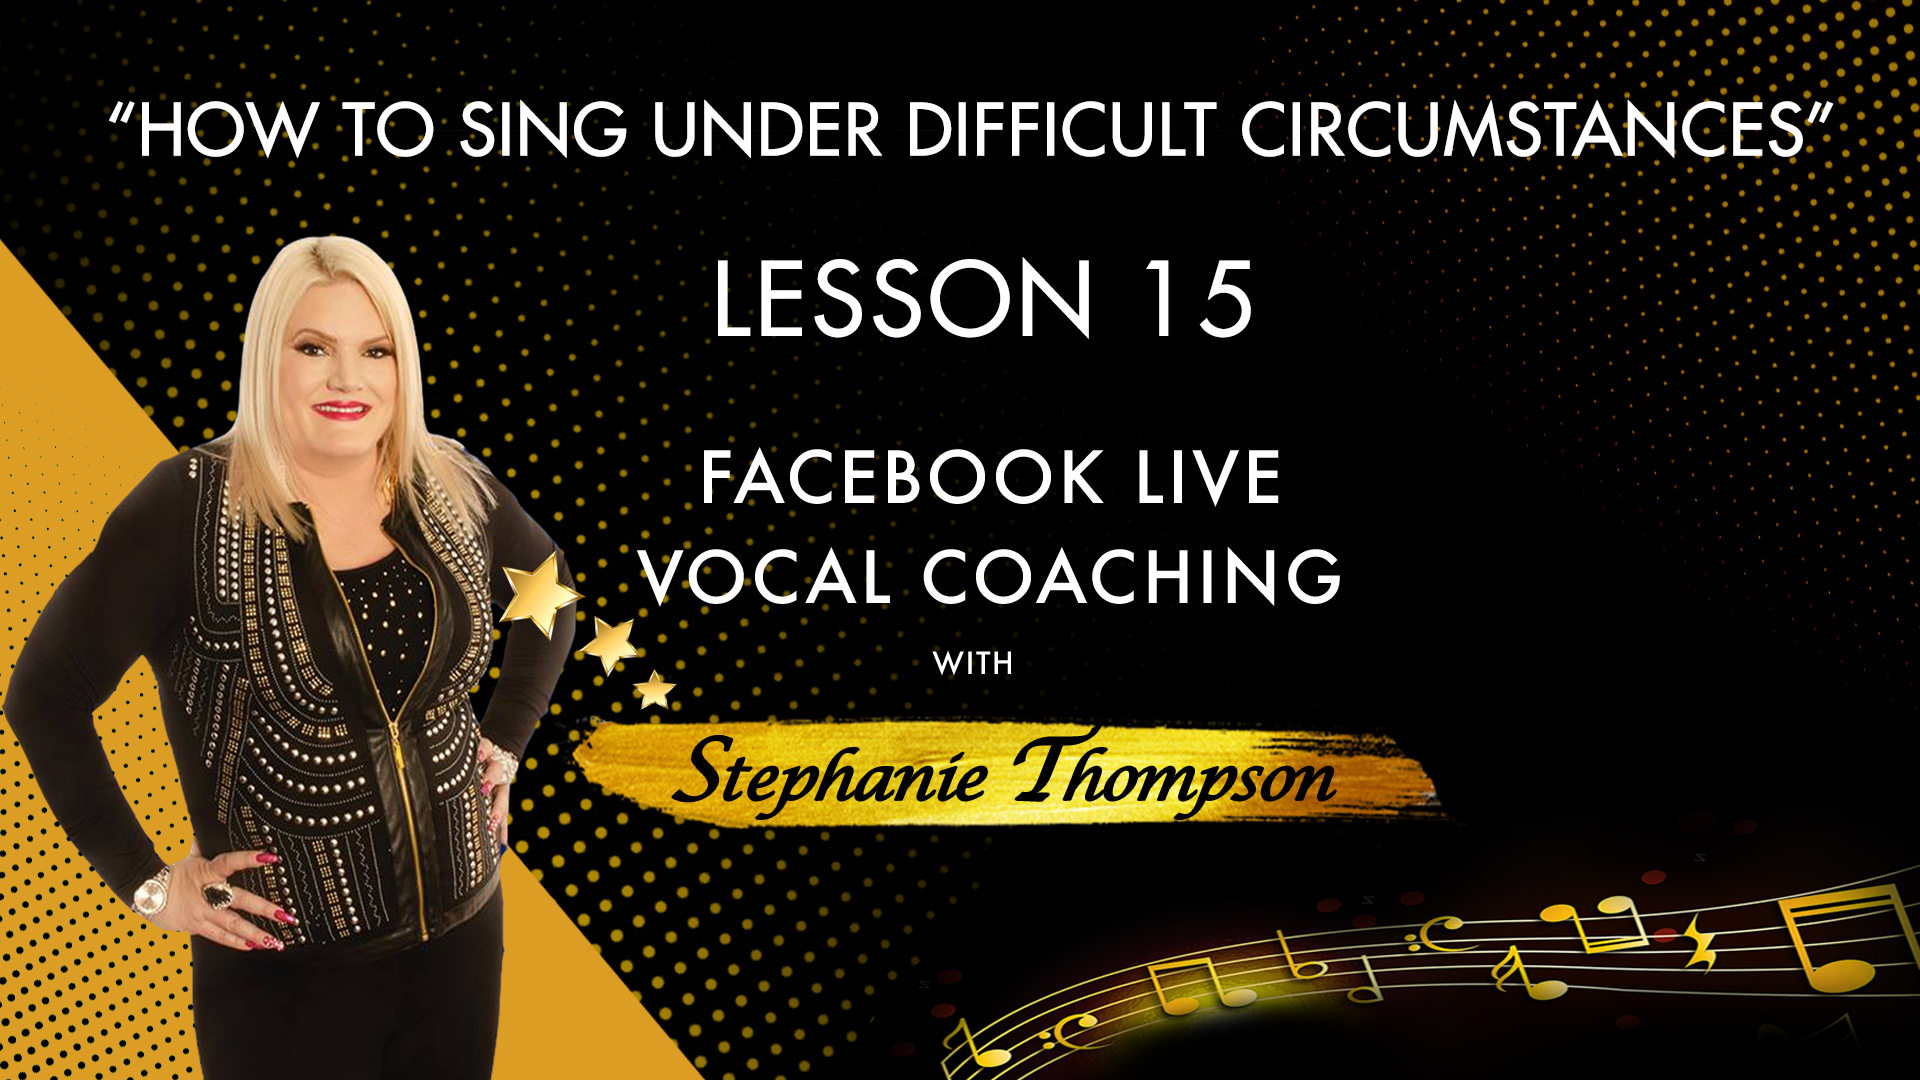 Lesson 15 - How To Sing Under Difficult Circumstances